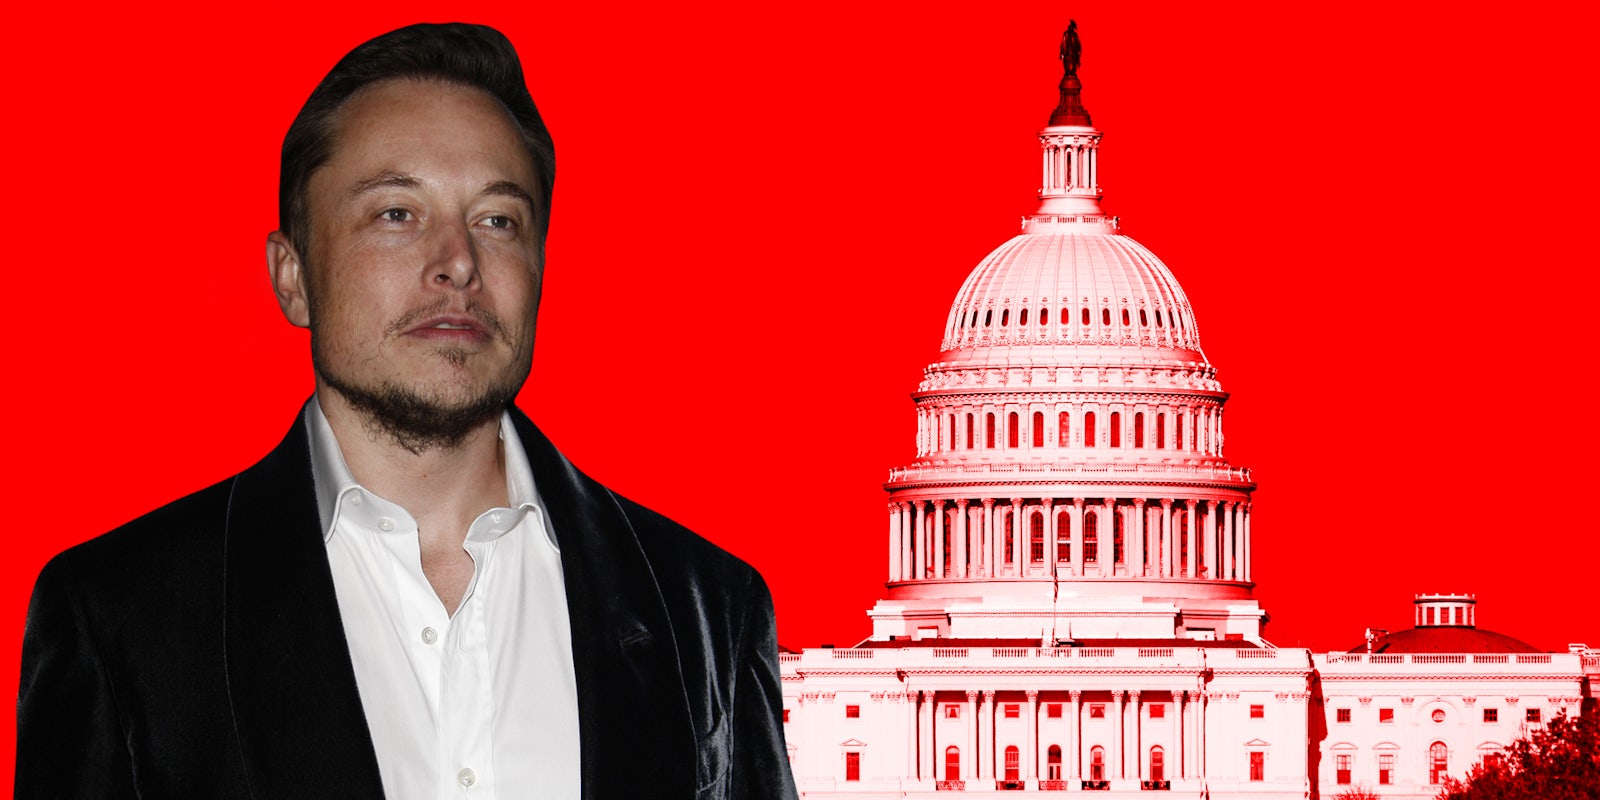 Elon Musk next to US Capitol building in front of red background